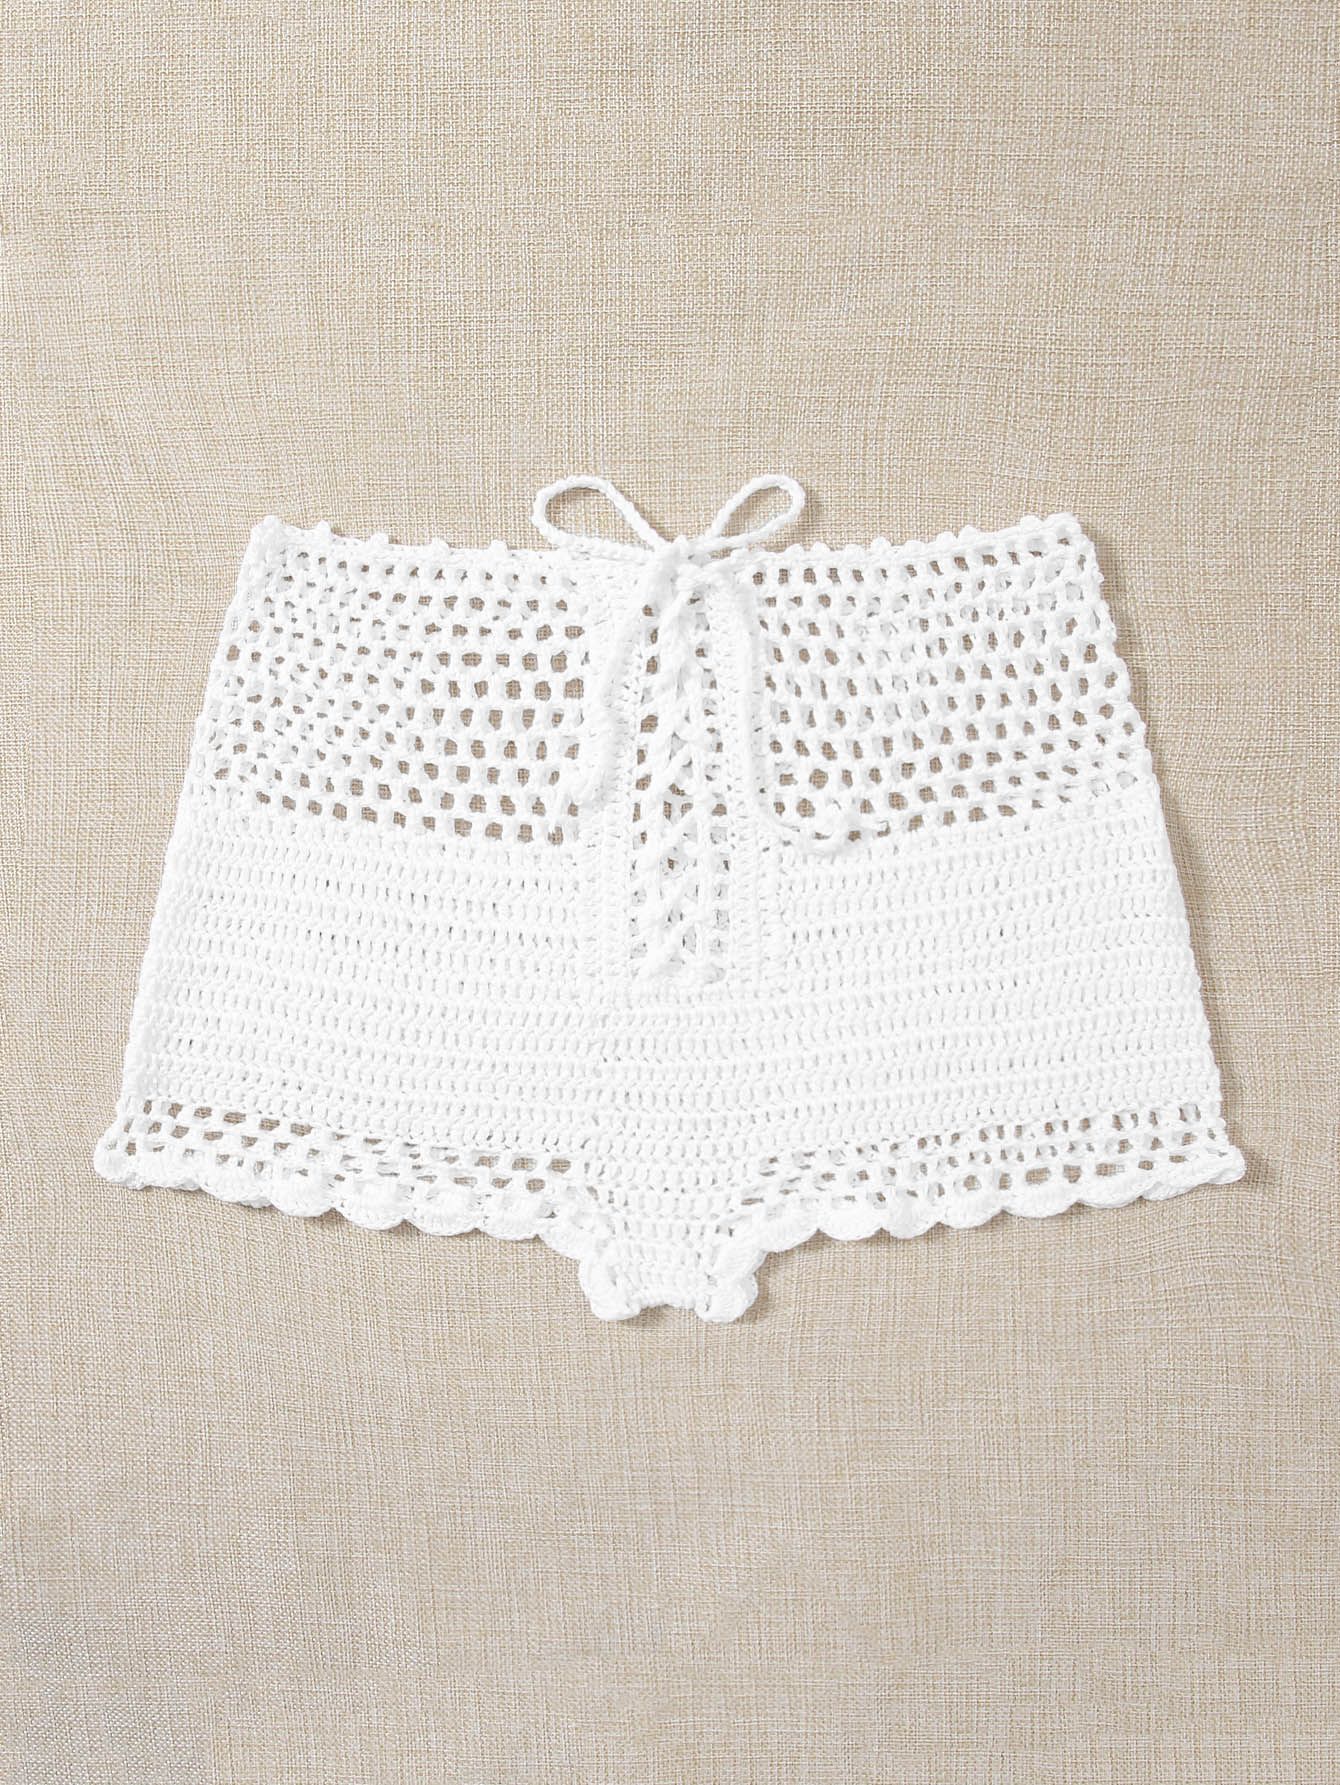 Lace Up Front Crochet Cover Up Shorts | SHEIN